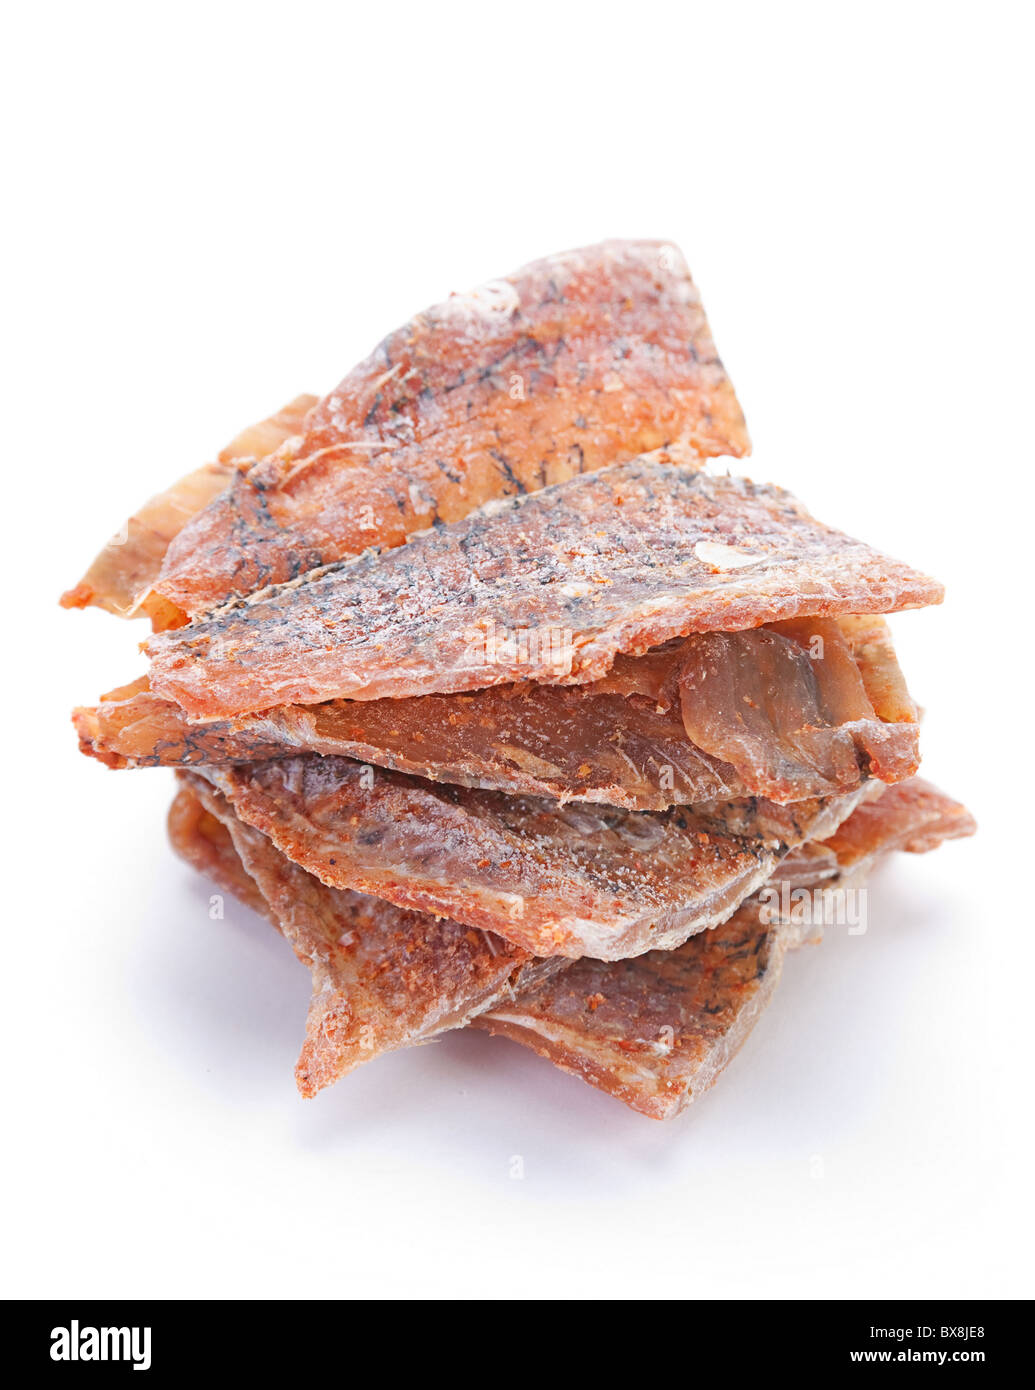 Dried fish snack Stock Photo